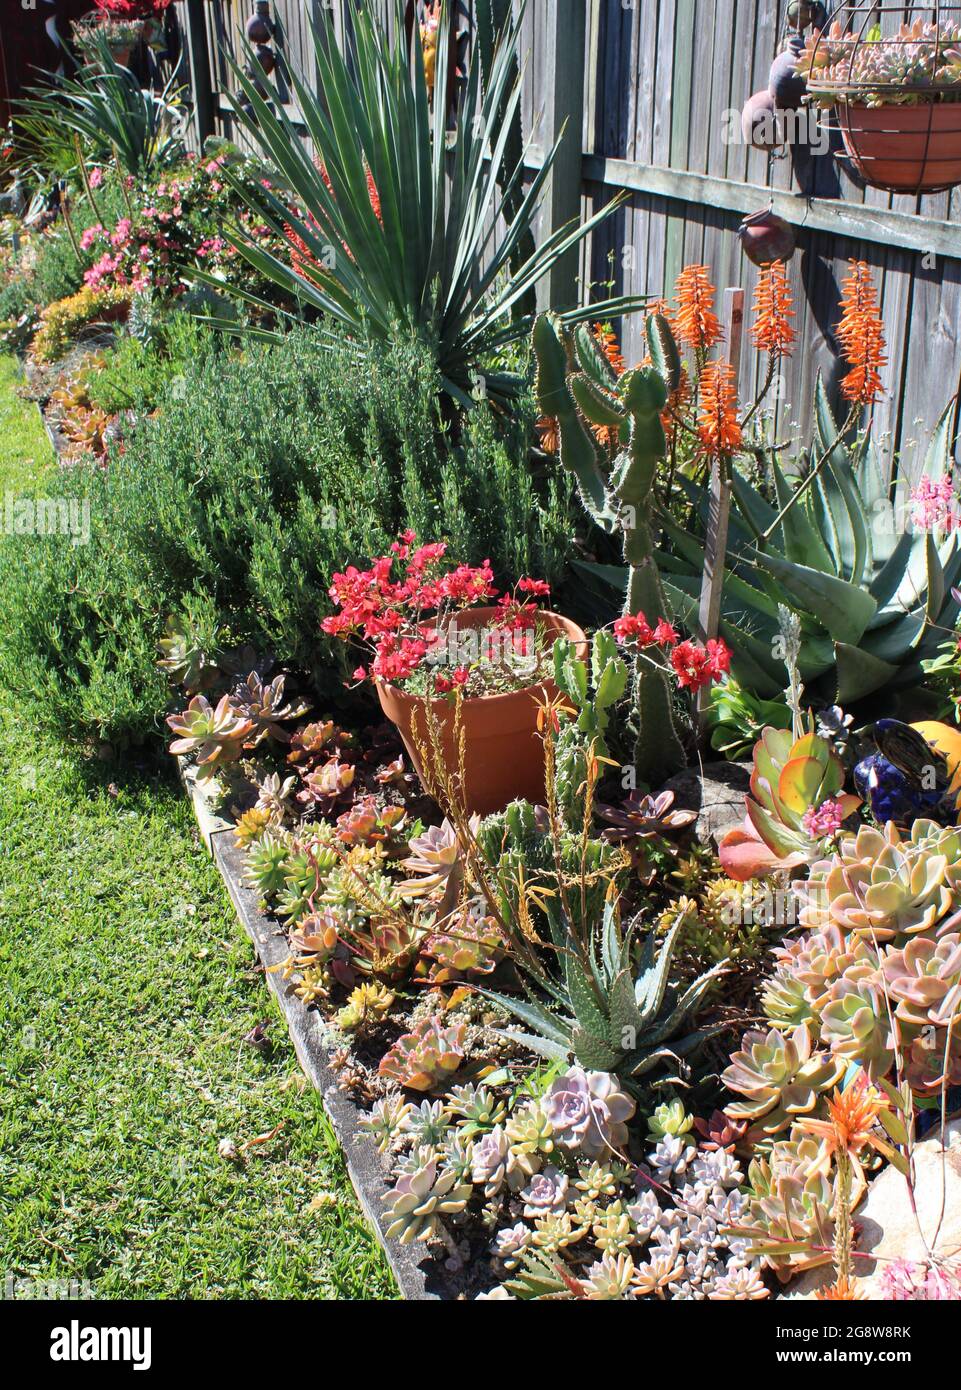 Australian private residential garden, with succulents that include Echeverias and Aloes. Stock Photo